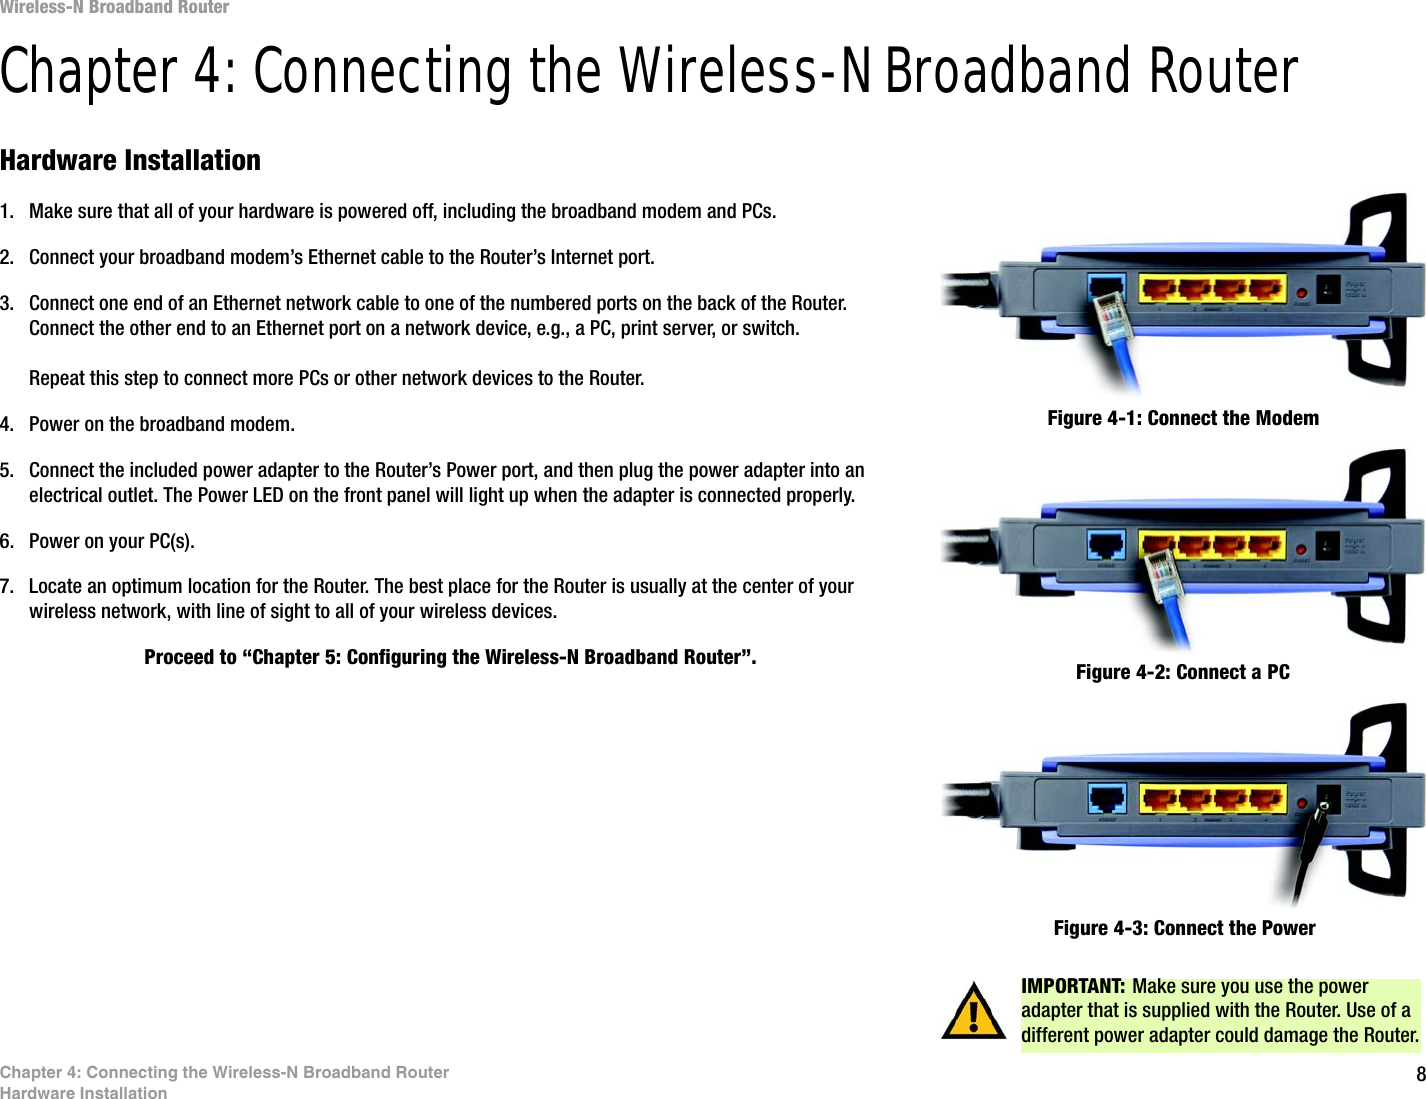 8Chapter 4: Connecting the Wireless-N Broadband RouterHardware InstallationWireless-N Broadband RouterChapter 4: Connecting the Wireless-N Broadband RouterHardware Installation1. Make sure that all of your hardware is powered off, including the broadband modem and PCs.2. Connect your broadband modem’s Ethernet cable to the Router’s Internet port.3. Connect one end of an Ethernet network cable to one of the numbered ports on the back of the Router. Connect the other end to an Ethernet port on a network device, e.g., a PC, print server, or switch.Repeat this step to connect more PCs or other network devices to the Router.4. Power on the broadband modem.5. Connect the included power adapter to the Router’s Power port, and then plug the power adapter into an electrical outlet. The Power LED on the front panel will light up when the adapter is connected properly.6. Power on your PC(s).7. Locate an optimum location for the Router. The best place for the Router is usually at the center of your wireless network, with line of sight to all of your wireless devices.Proceed to “Chapter 5: Configuring the Wireless-N Broadband Router”.Figure 4-1: Connect the ModemFigure 4-2: Connect a PCFigure 4-3: Connect the PowerIMPORTANT: Make sure you use the power adapter that is supplied with the Router. Use of a different power adapter could damage the Router.